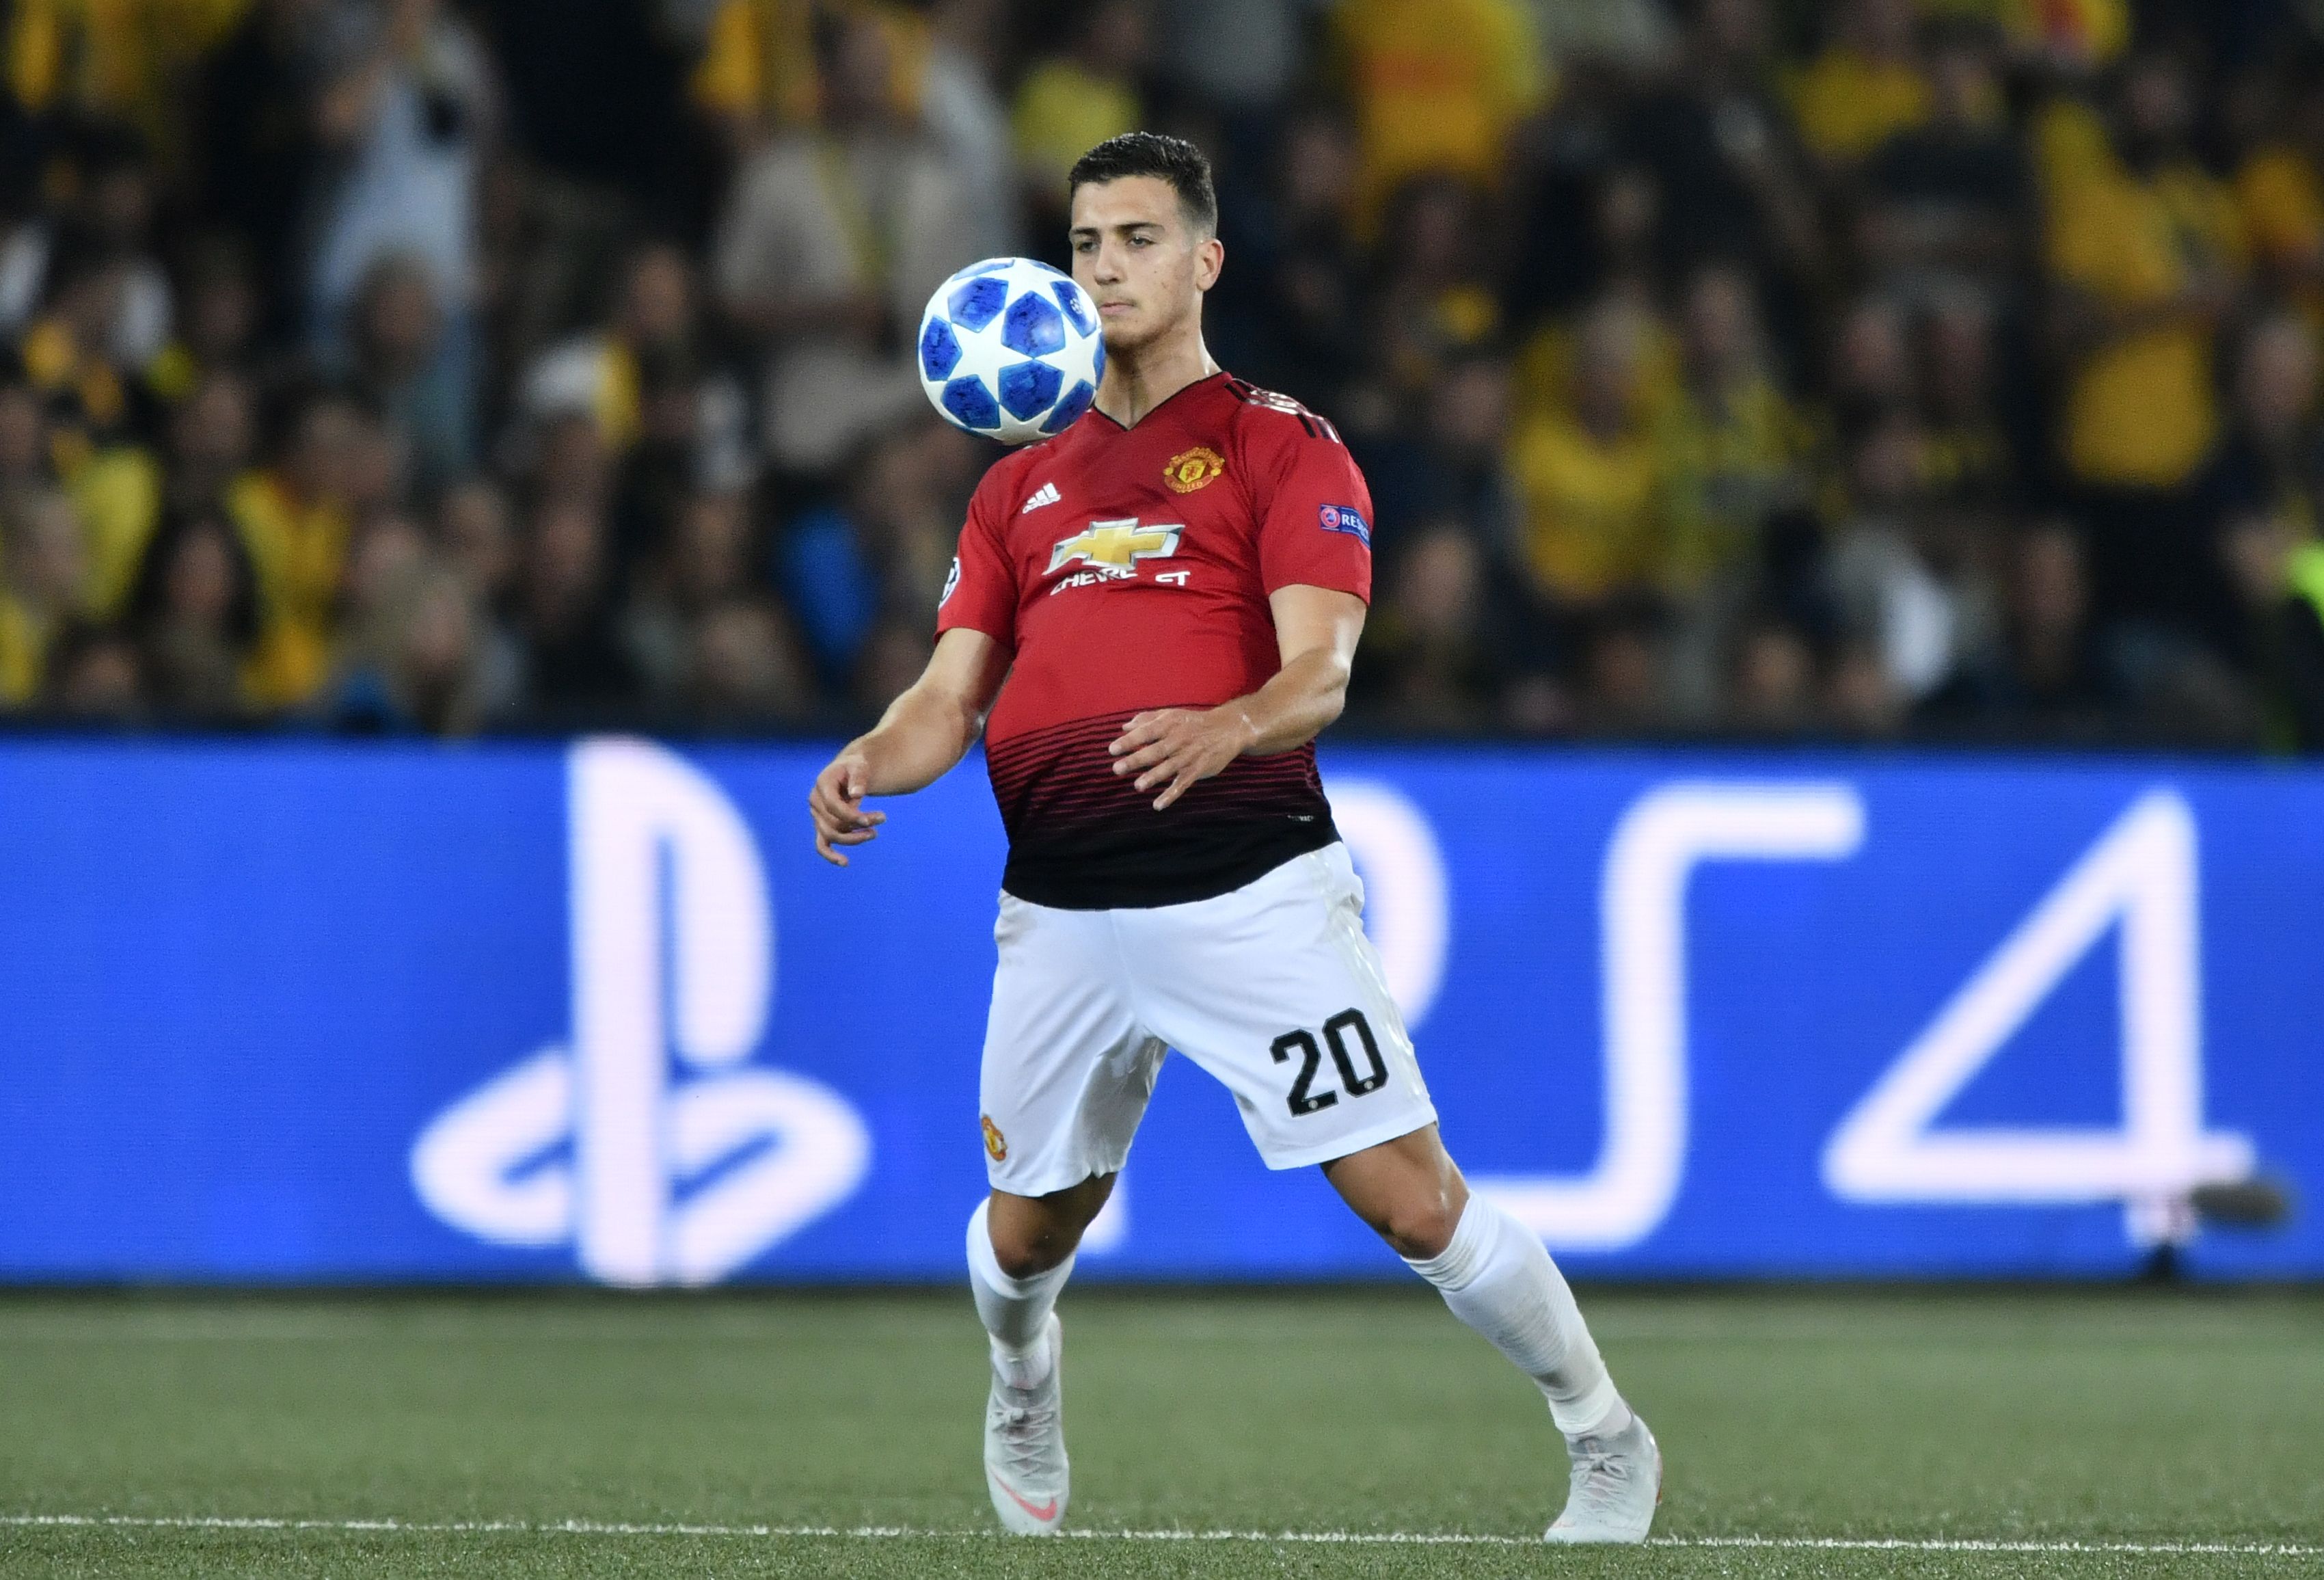 Manchester United's Portuguese defender Diogo Dalot controls the ball during the UEFA Champions League group H football match between Young Boys and Manchester United at The Stade de Suisse in Bern on September 19, 2018. (Photo by Fabrice COFFRINI / AFP)        (Photo credit should read FABRICE COFFRINI/AFP/Getty Images)